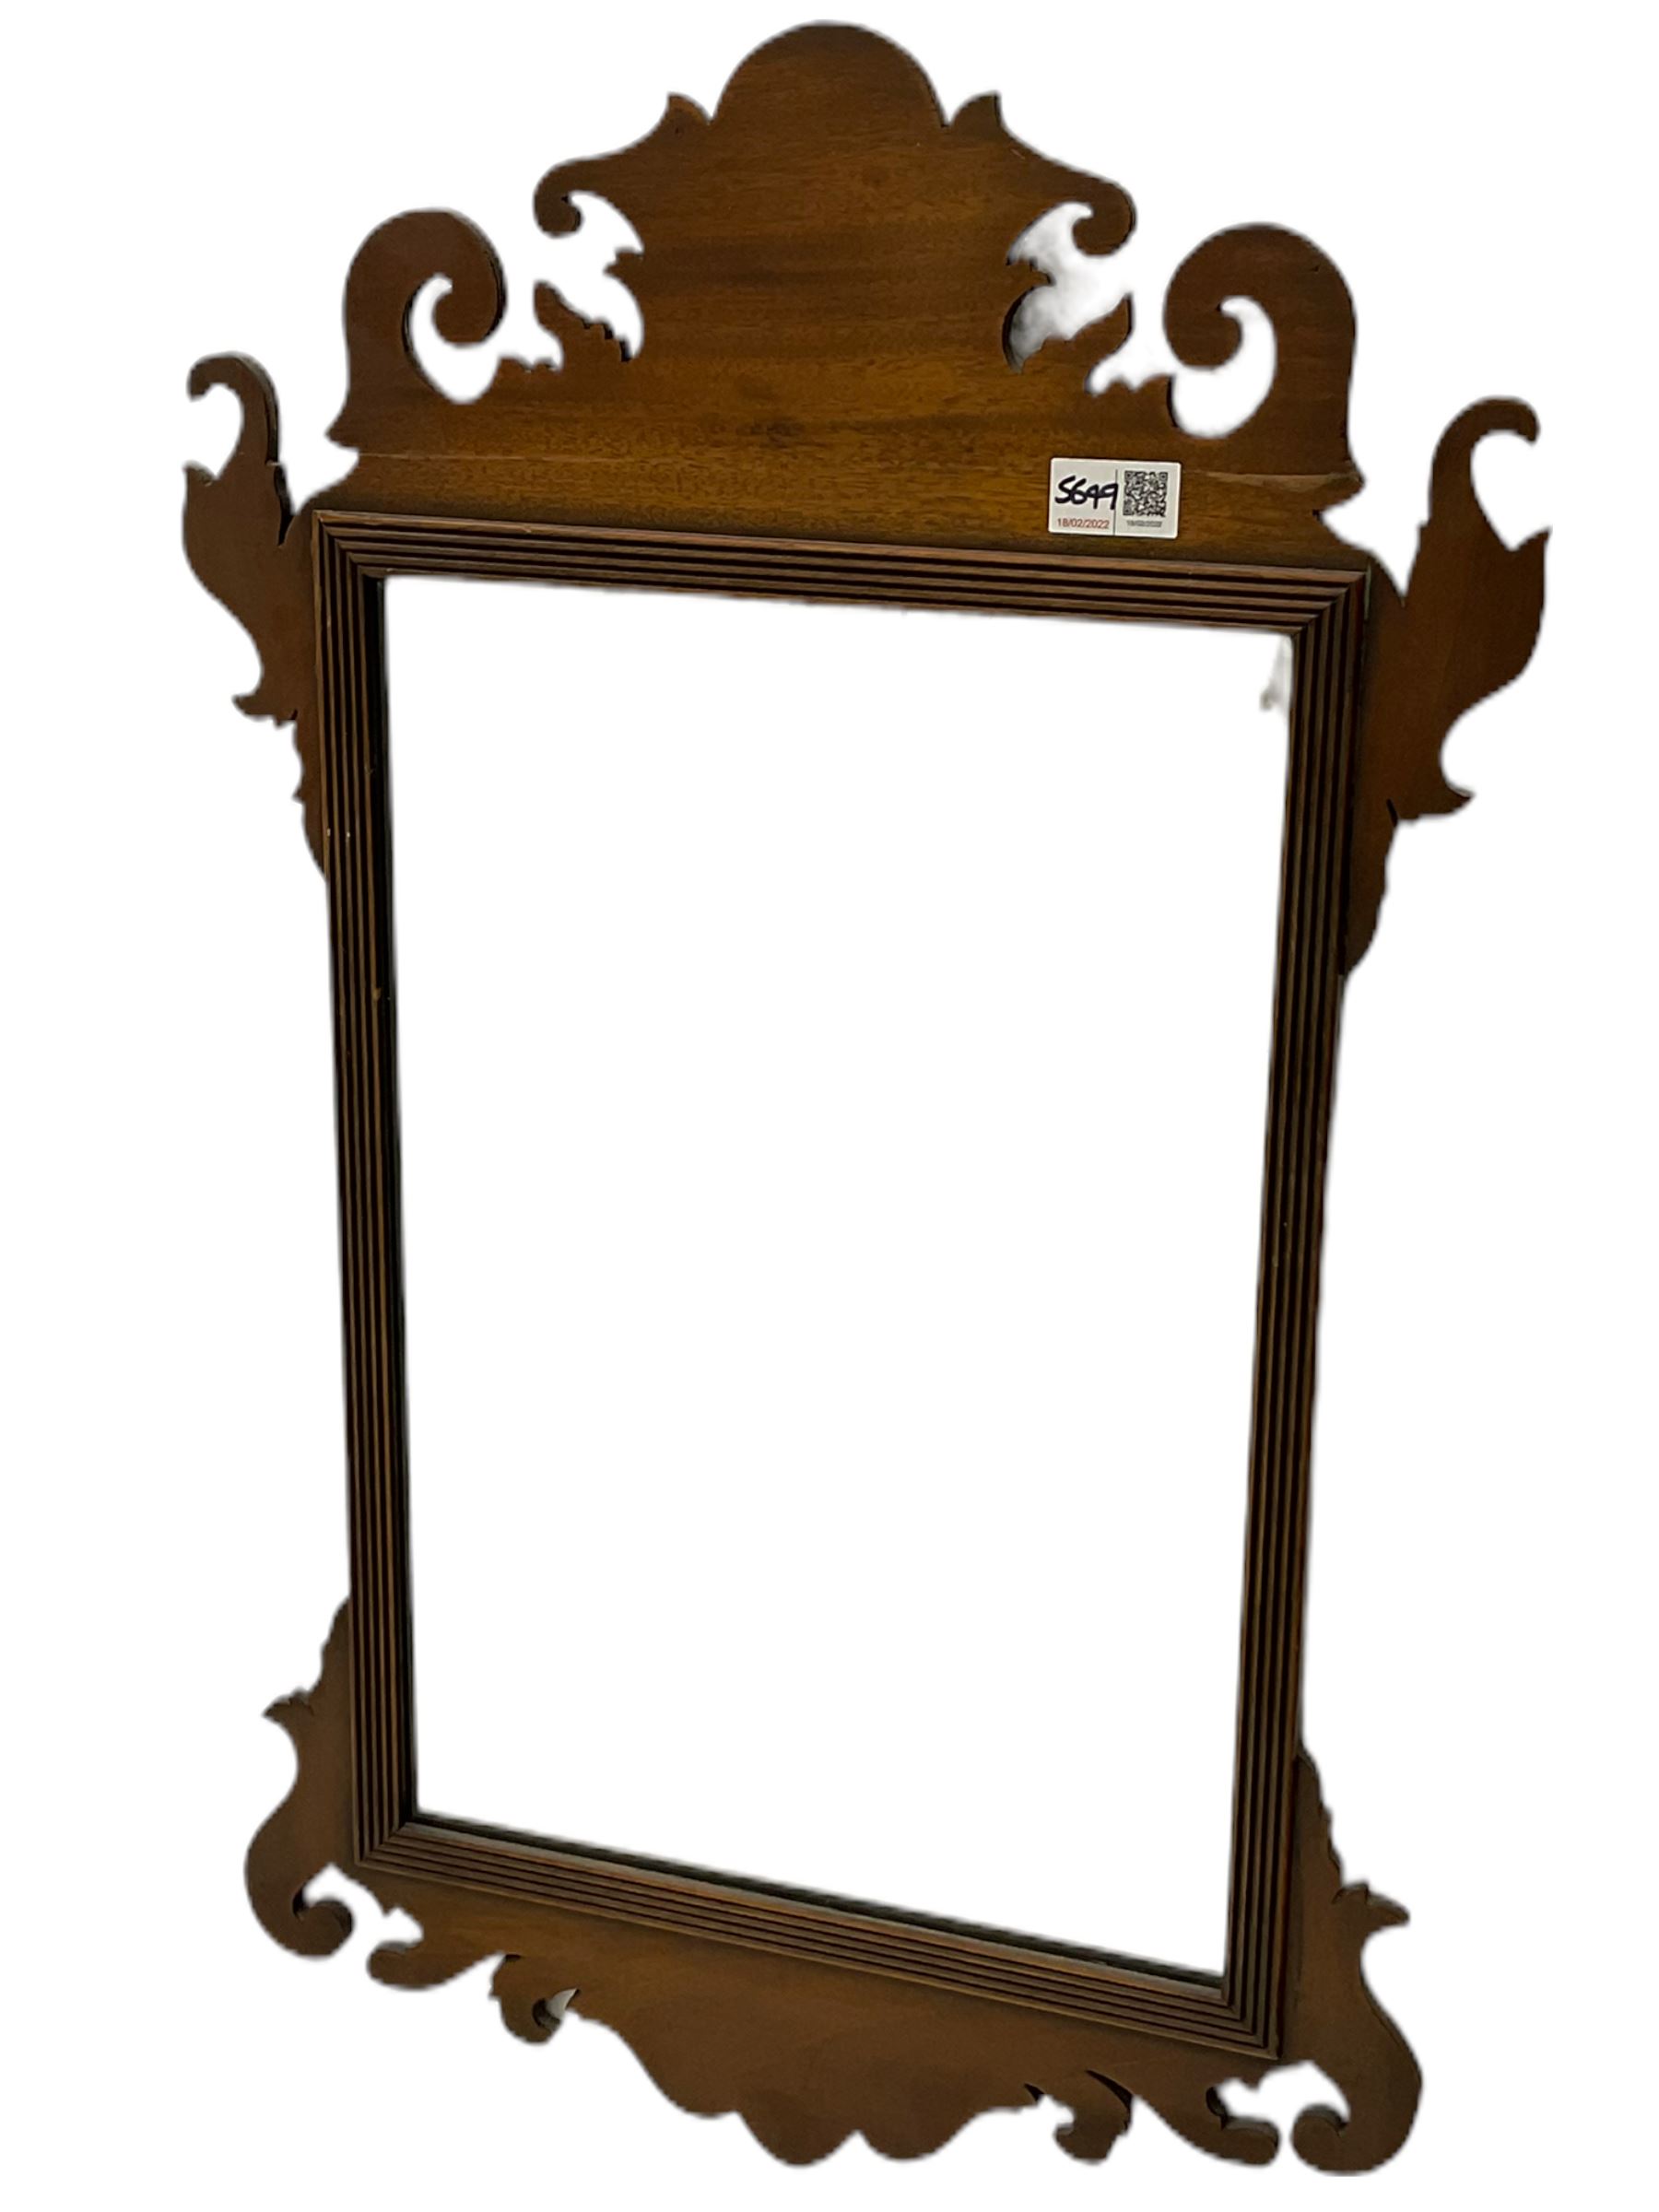 Three Chippendale style mahogany fretwork wall mirrors - Image 3 of 4